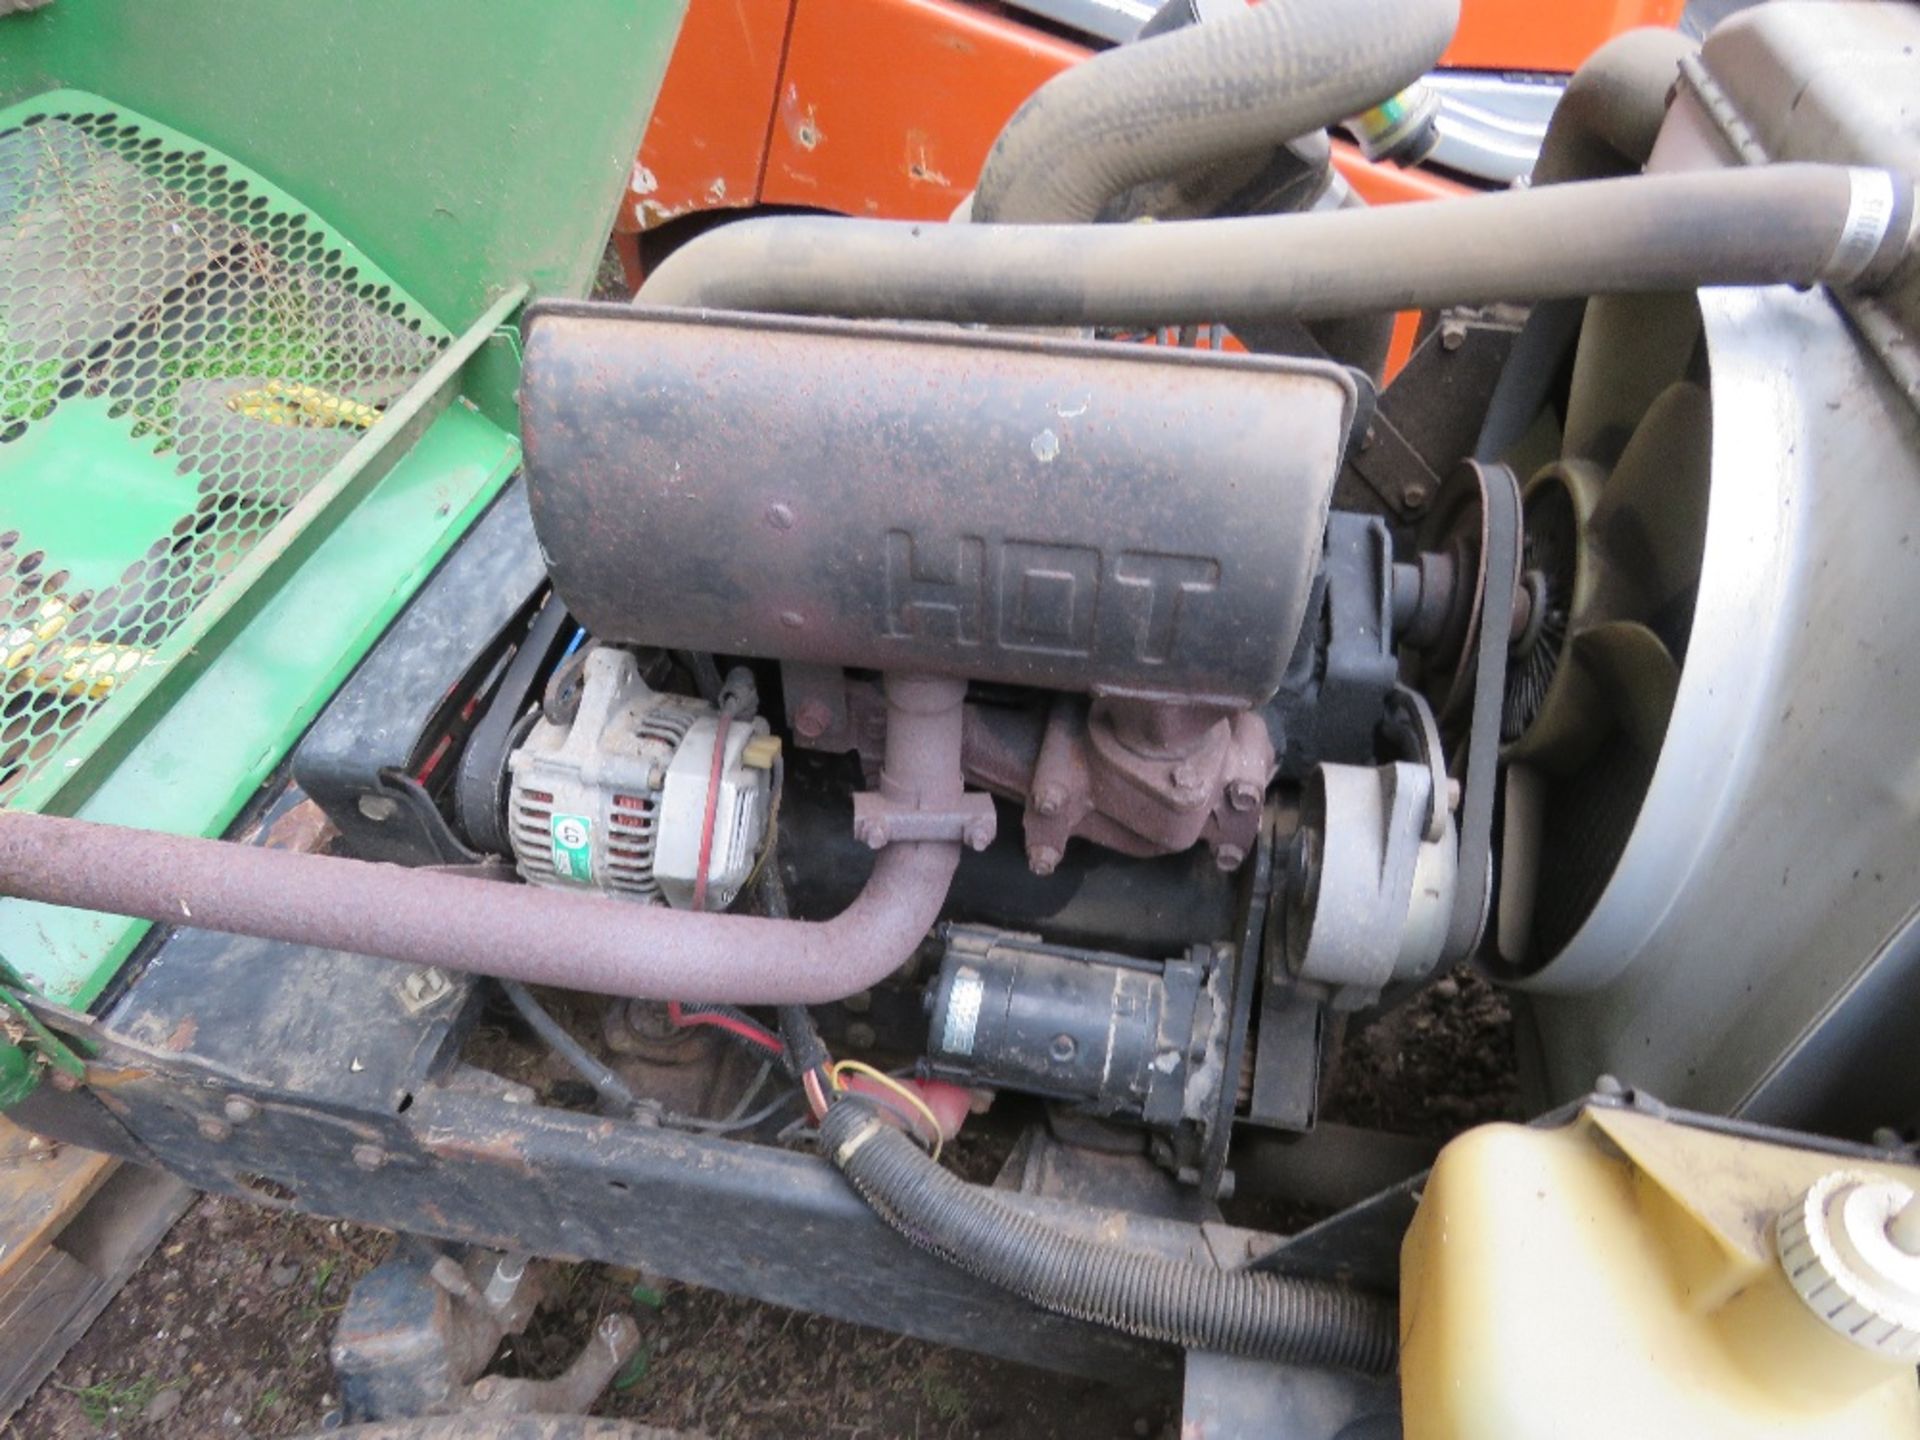 JOHN DEERE 1145 4WD OUT FRONT ROTARY MOWER. WHEN TESTED WAS SEEN TO START, RUN, DRIVE AND MOWER ENGA - Image 8 of 11